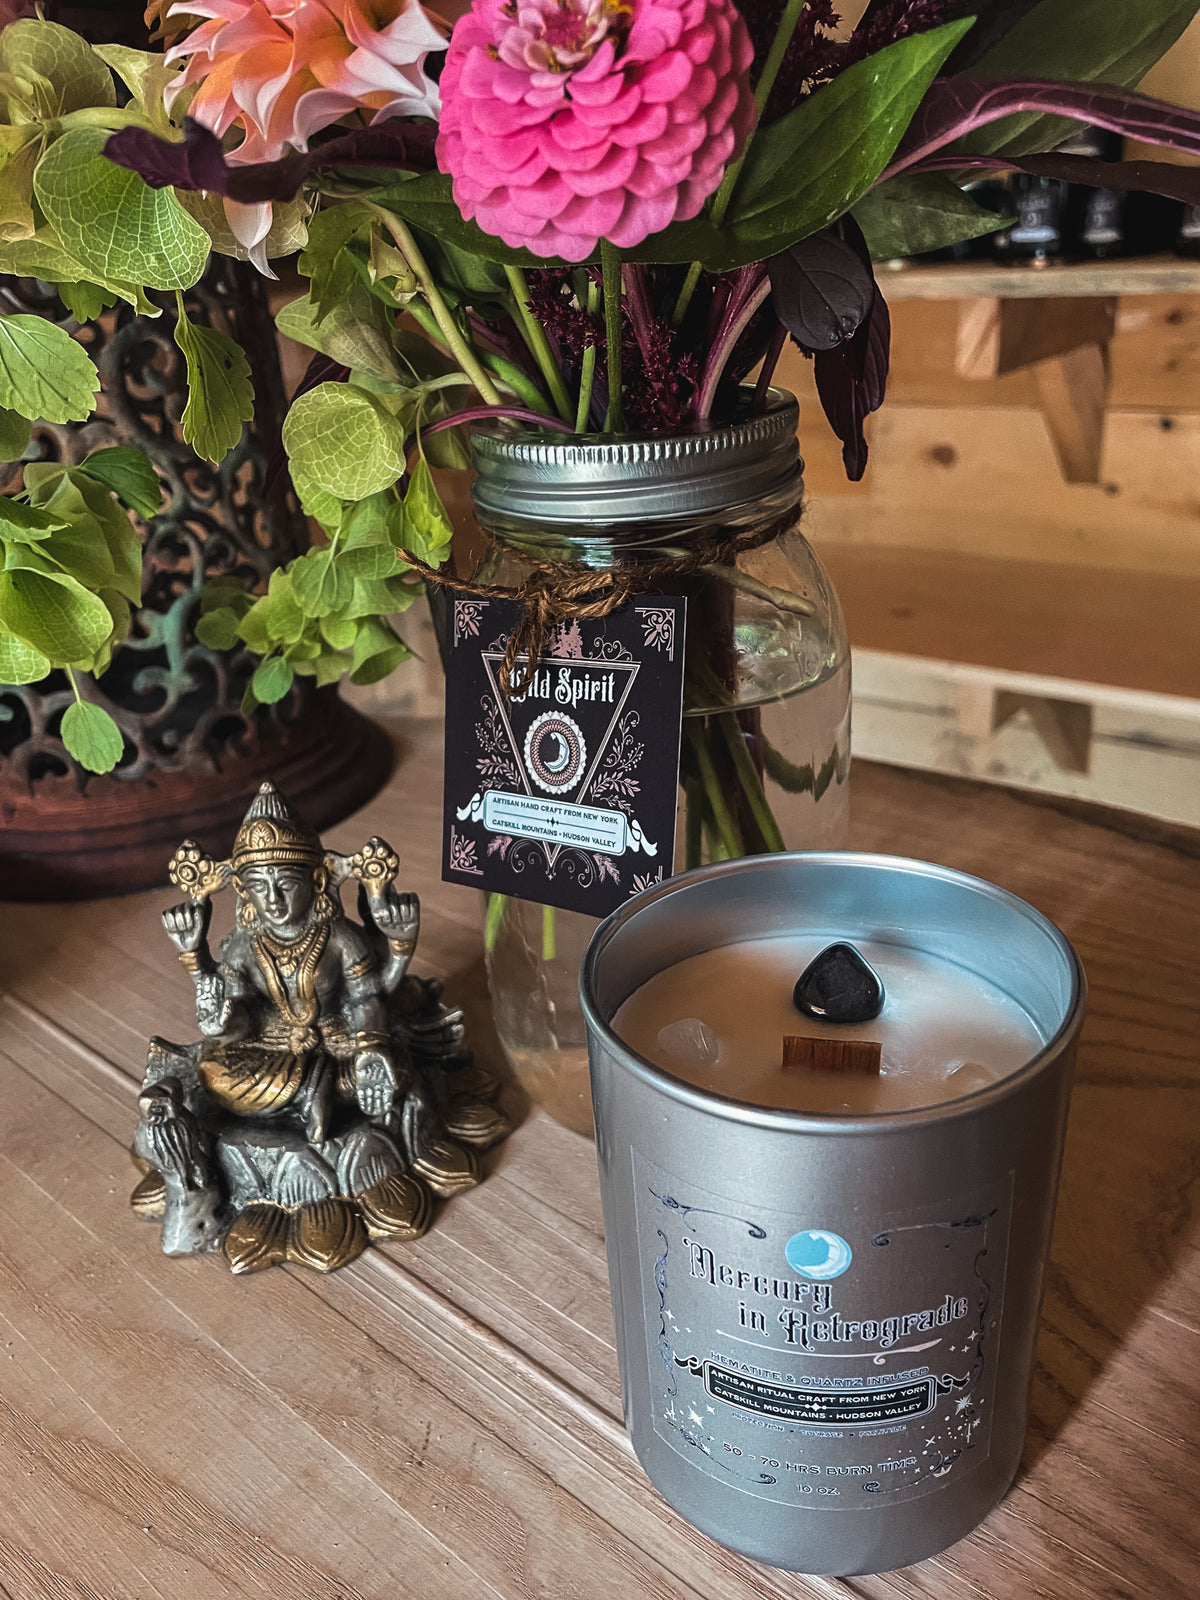 Spirited Collection - Mercury in Retrograde Candle